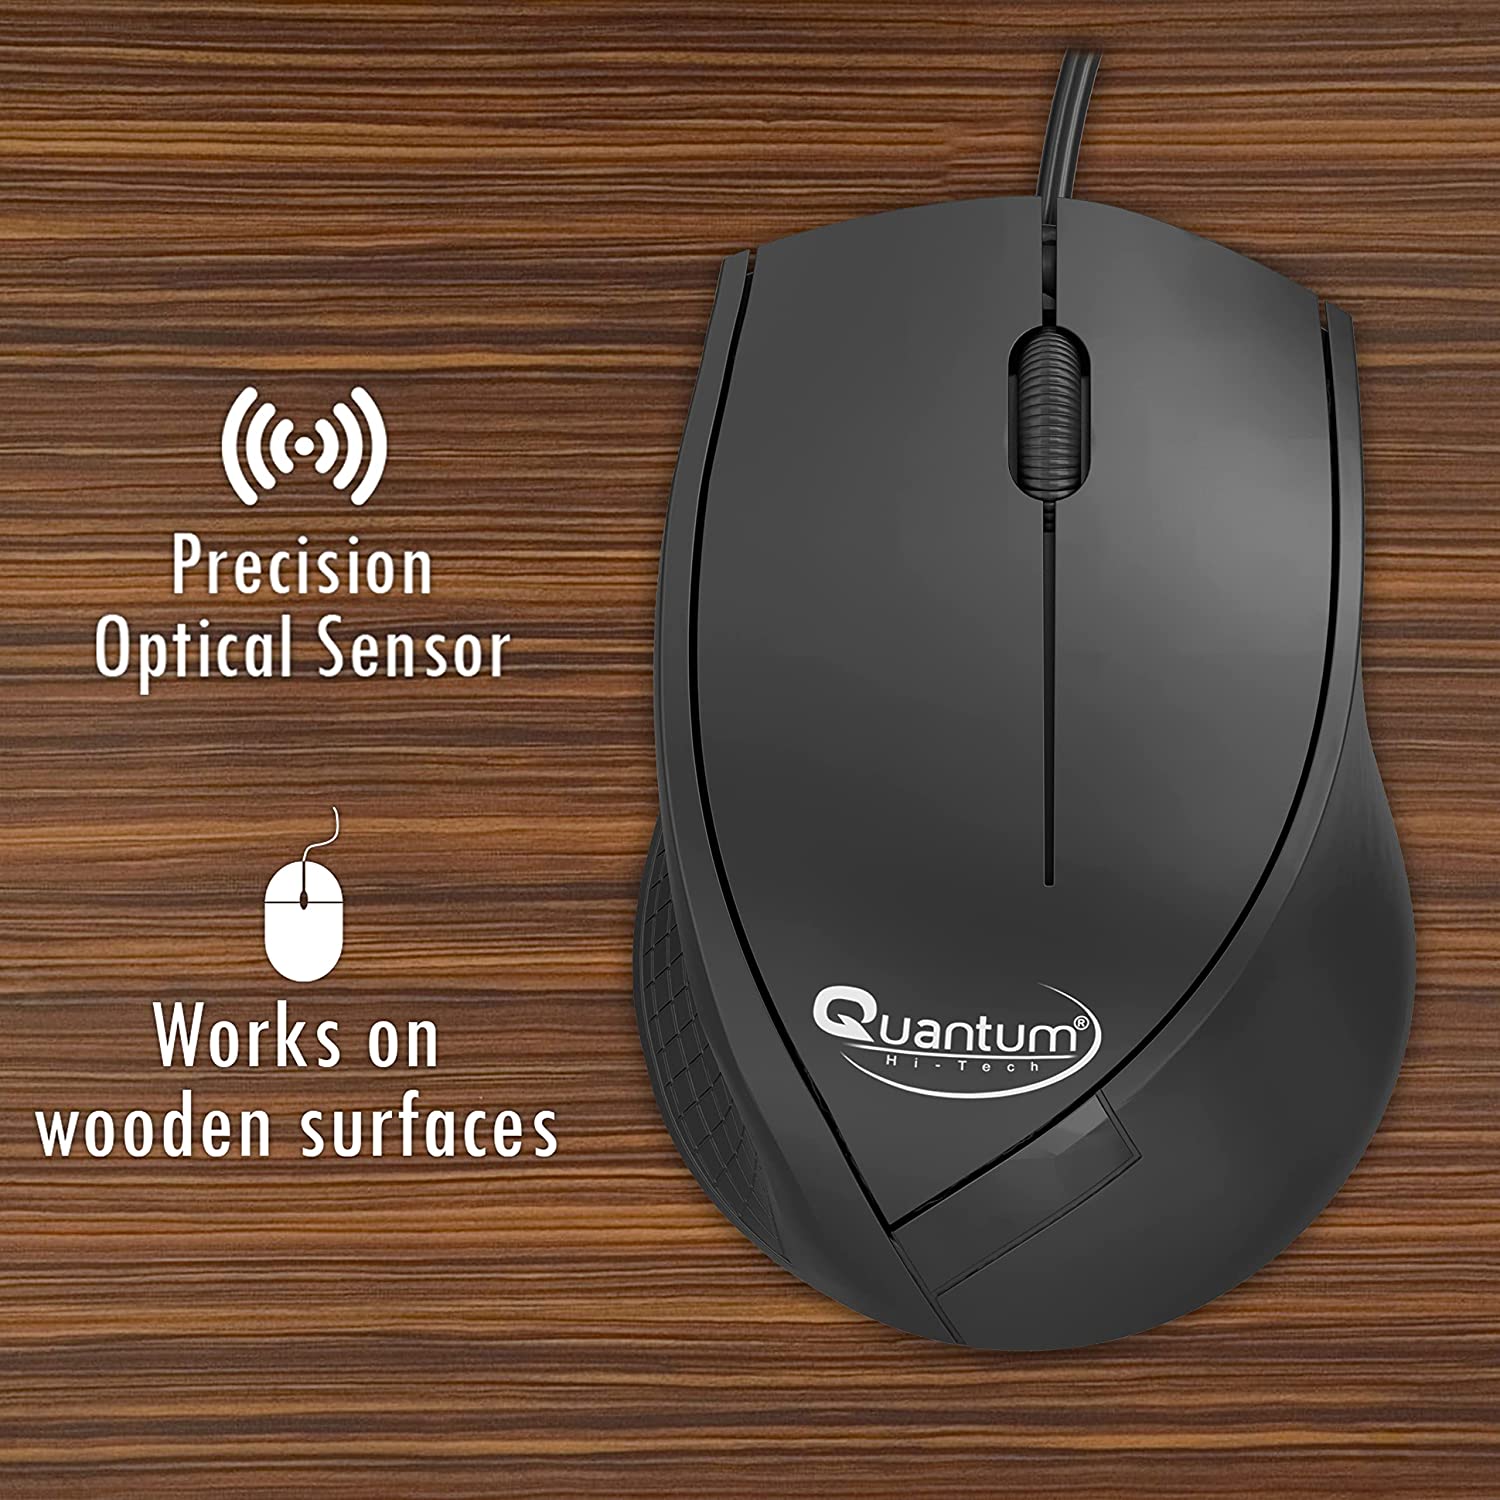 Quantum USB Wired Mouse, 1200 DPI Optical Sensor, Plug & Play Ergonomic Mouse for Comfortable All-Day Grip with 3-Button Design and clickable Scroll Wheel, USB 2.0 Mice for PC/Laptop, QHM251H (Black)